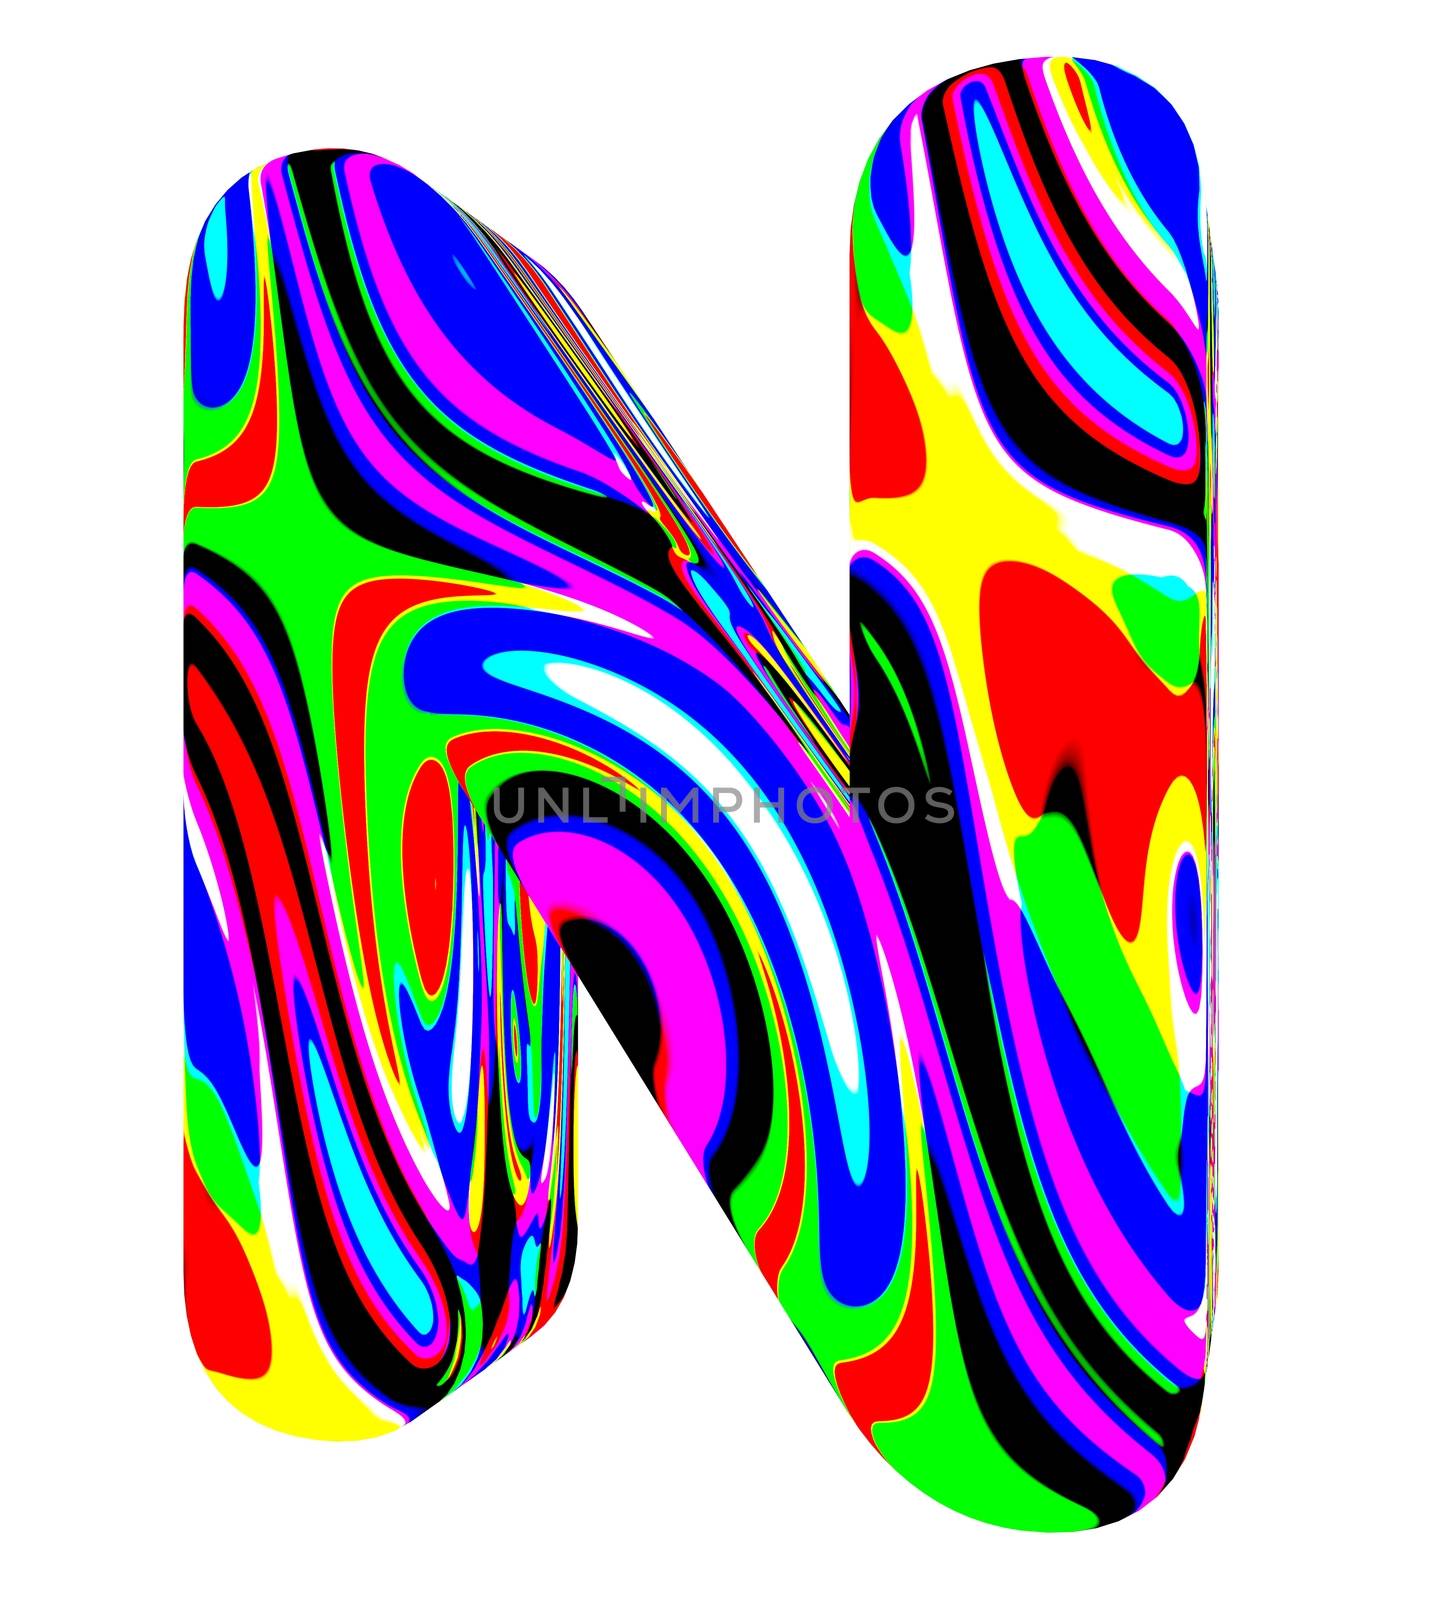 3d letter colored with bright colors